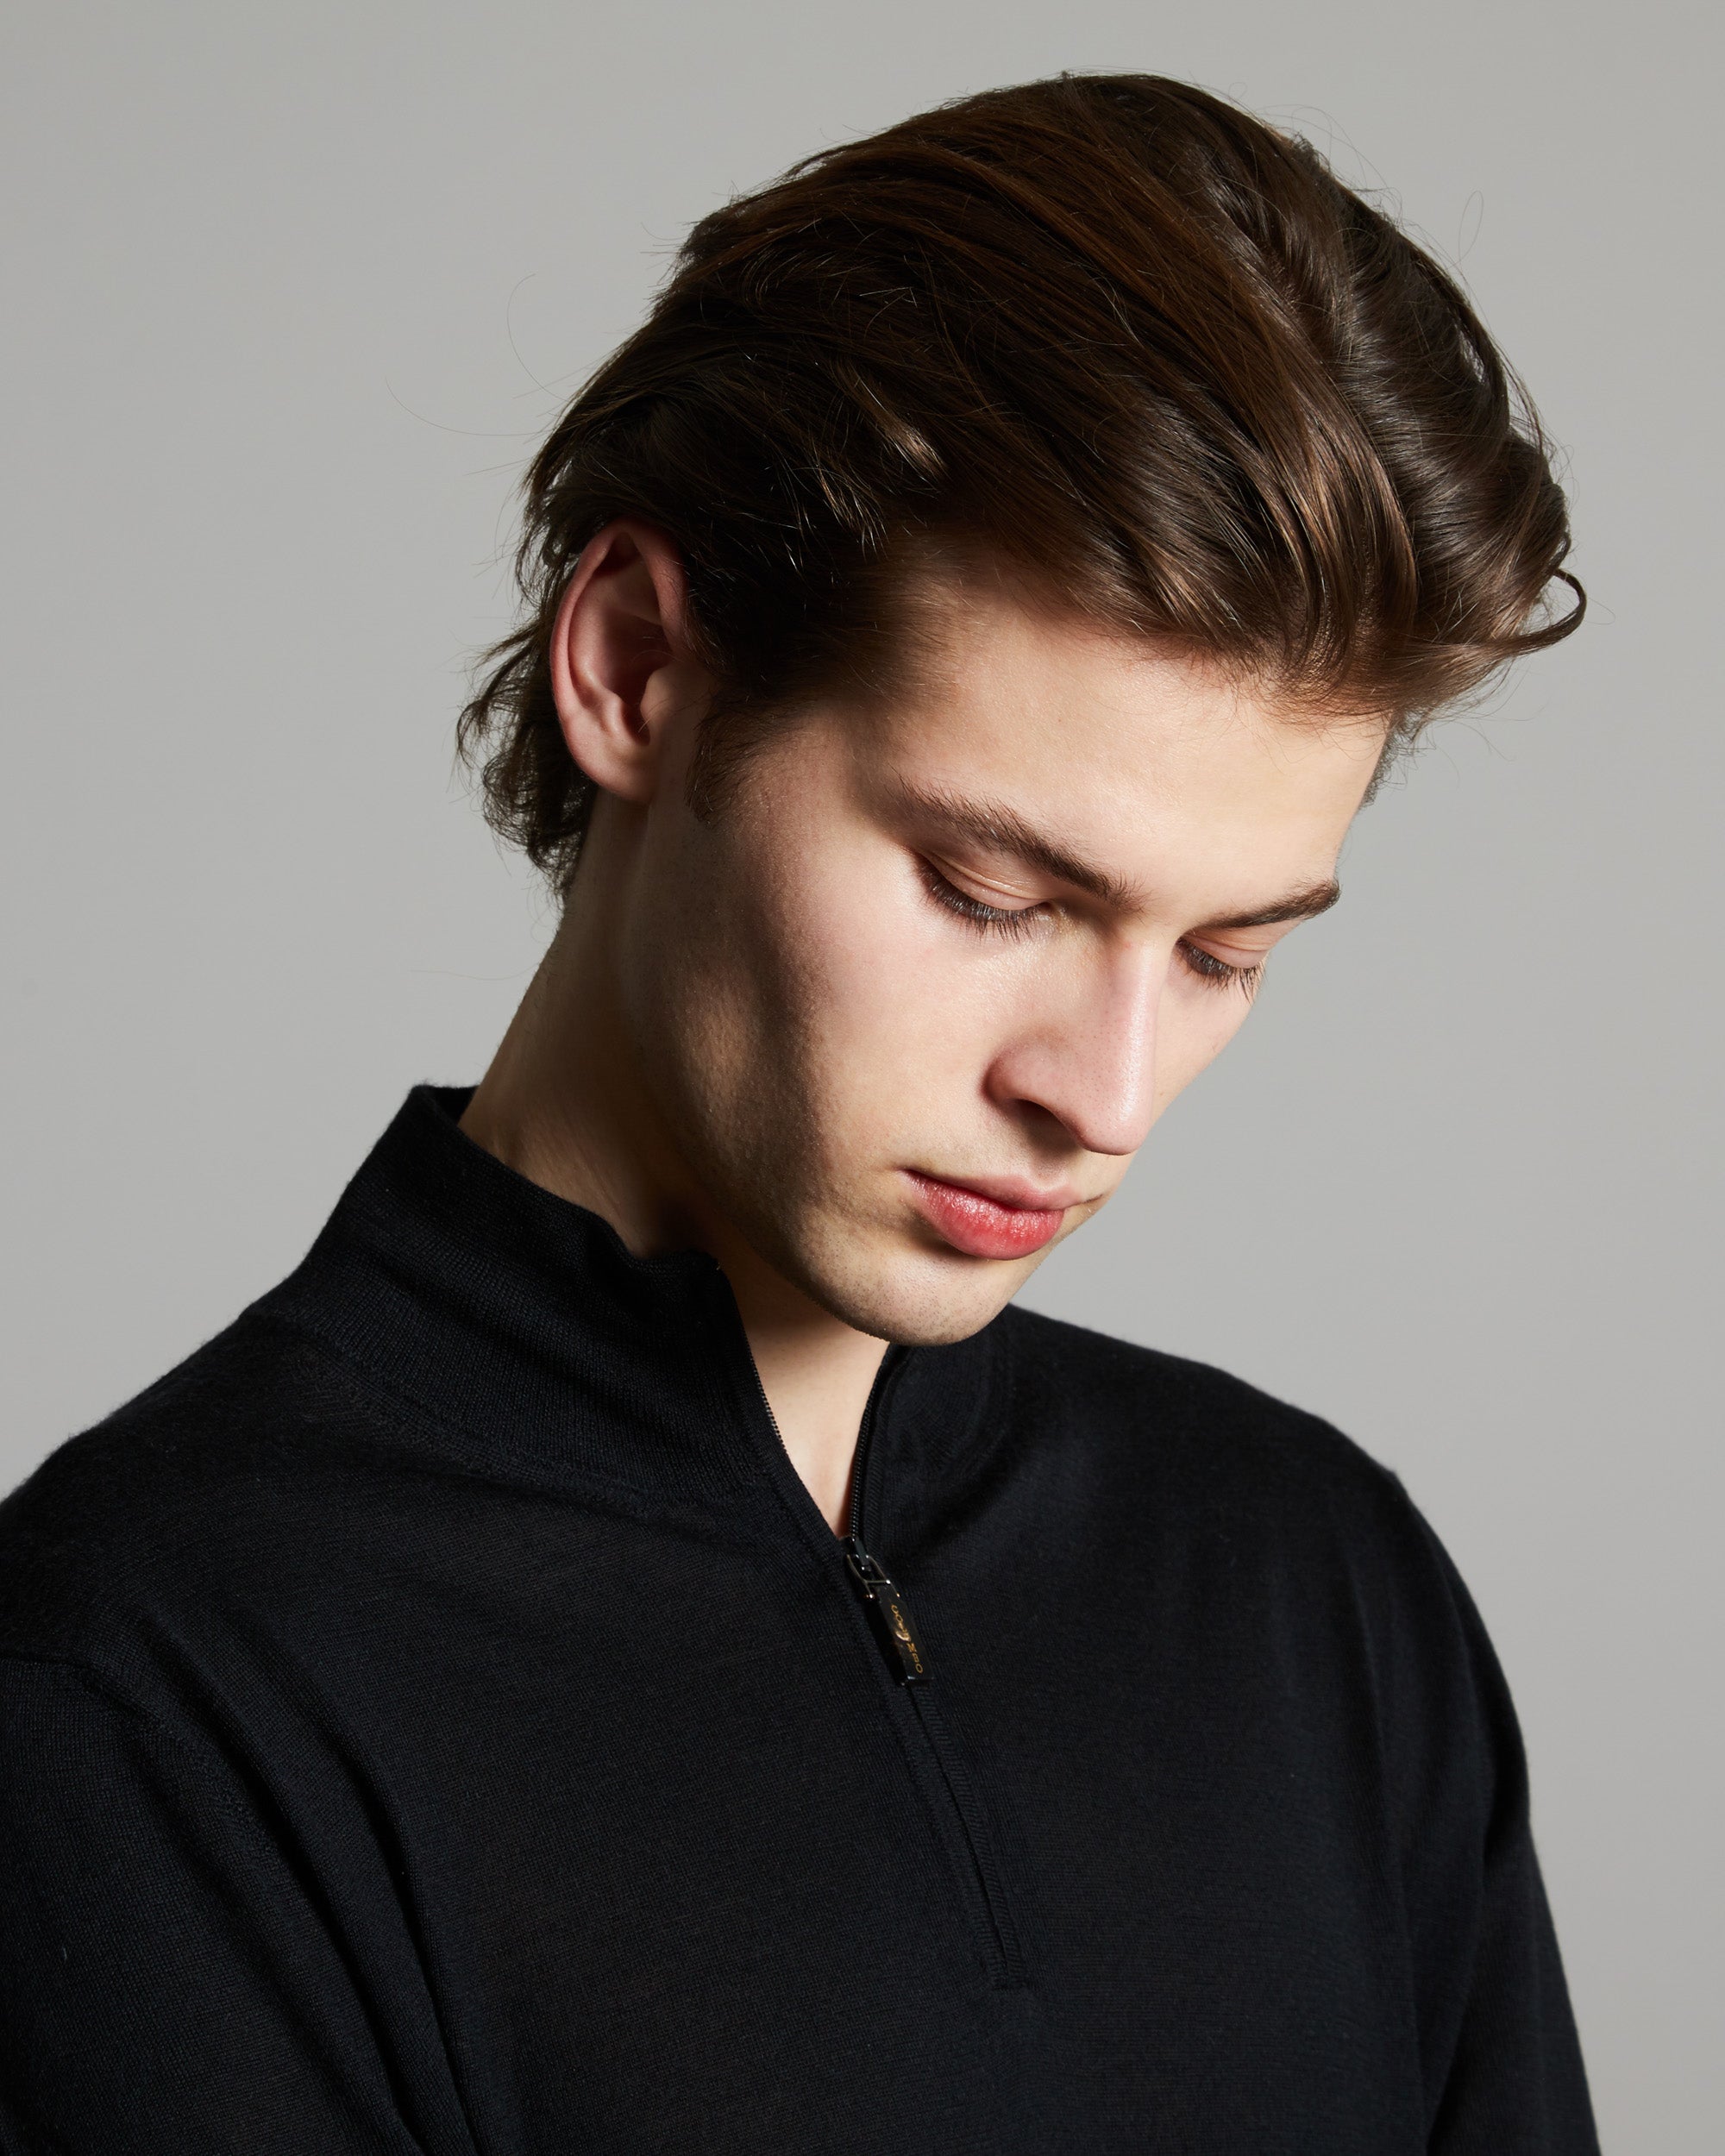 Black cashmere and silk men's zipped mock neck sweater